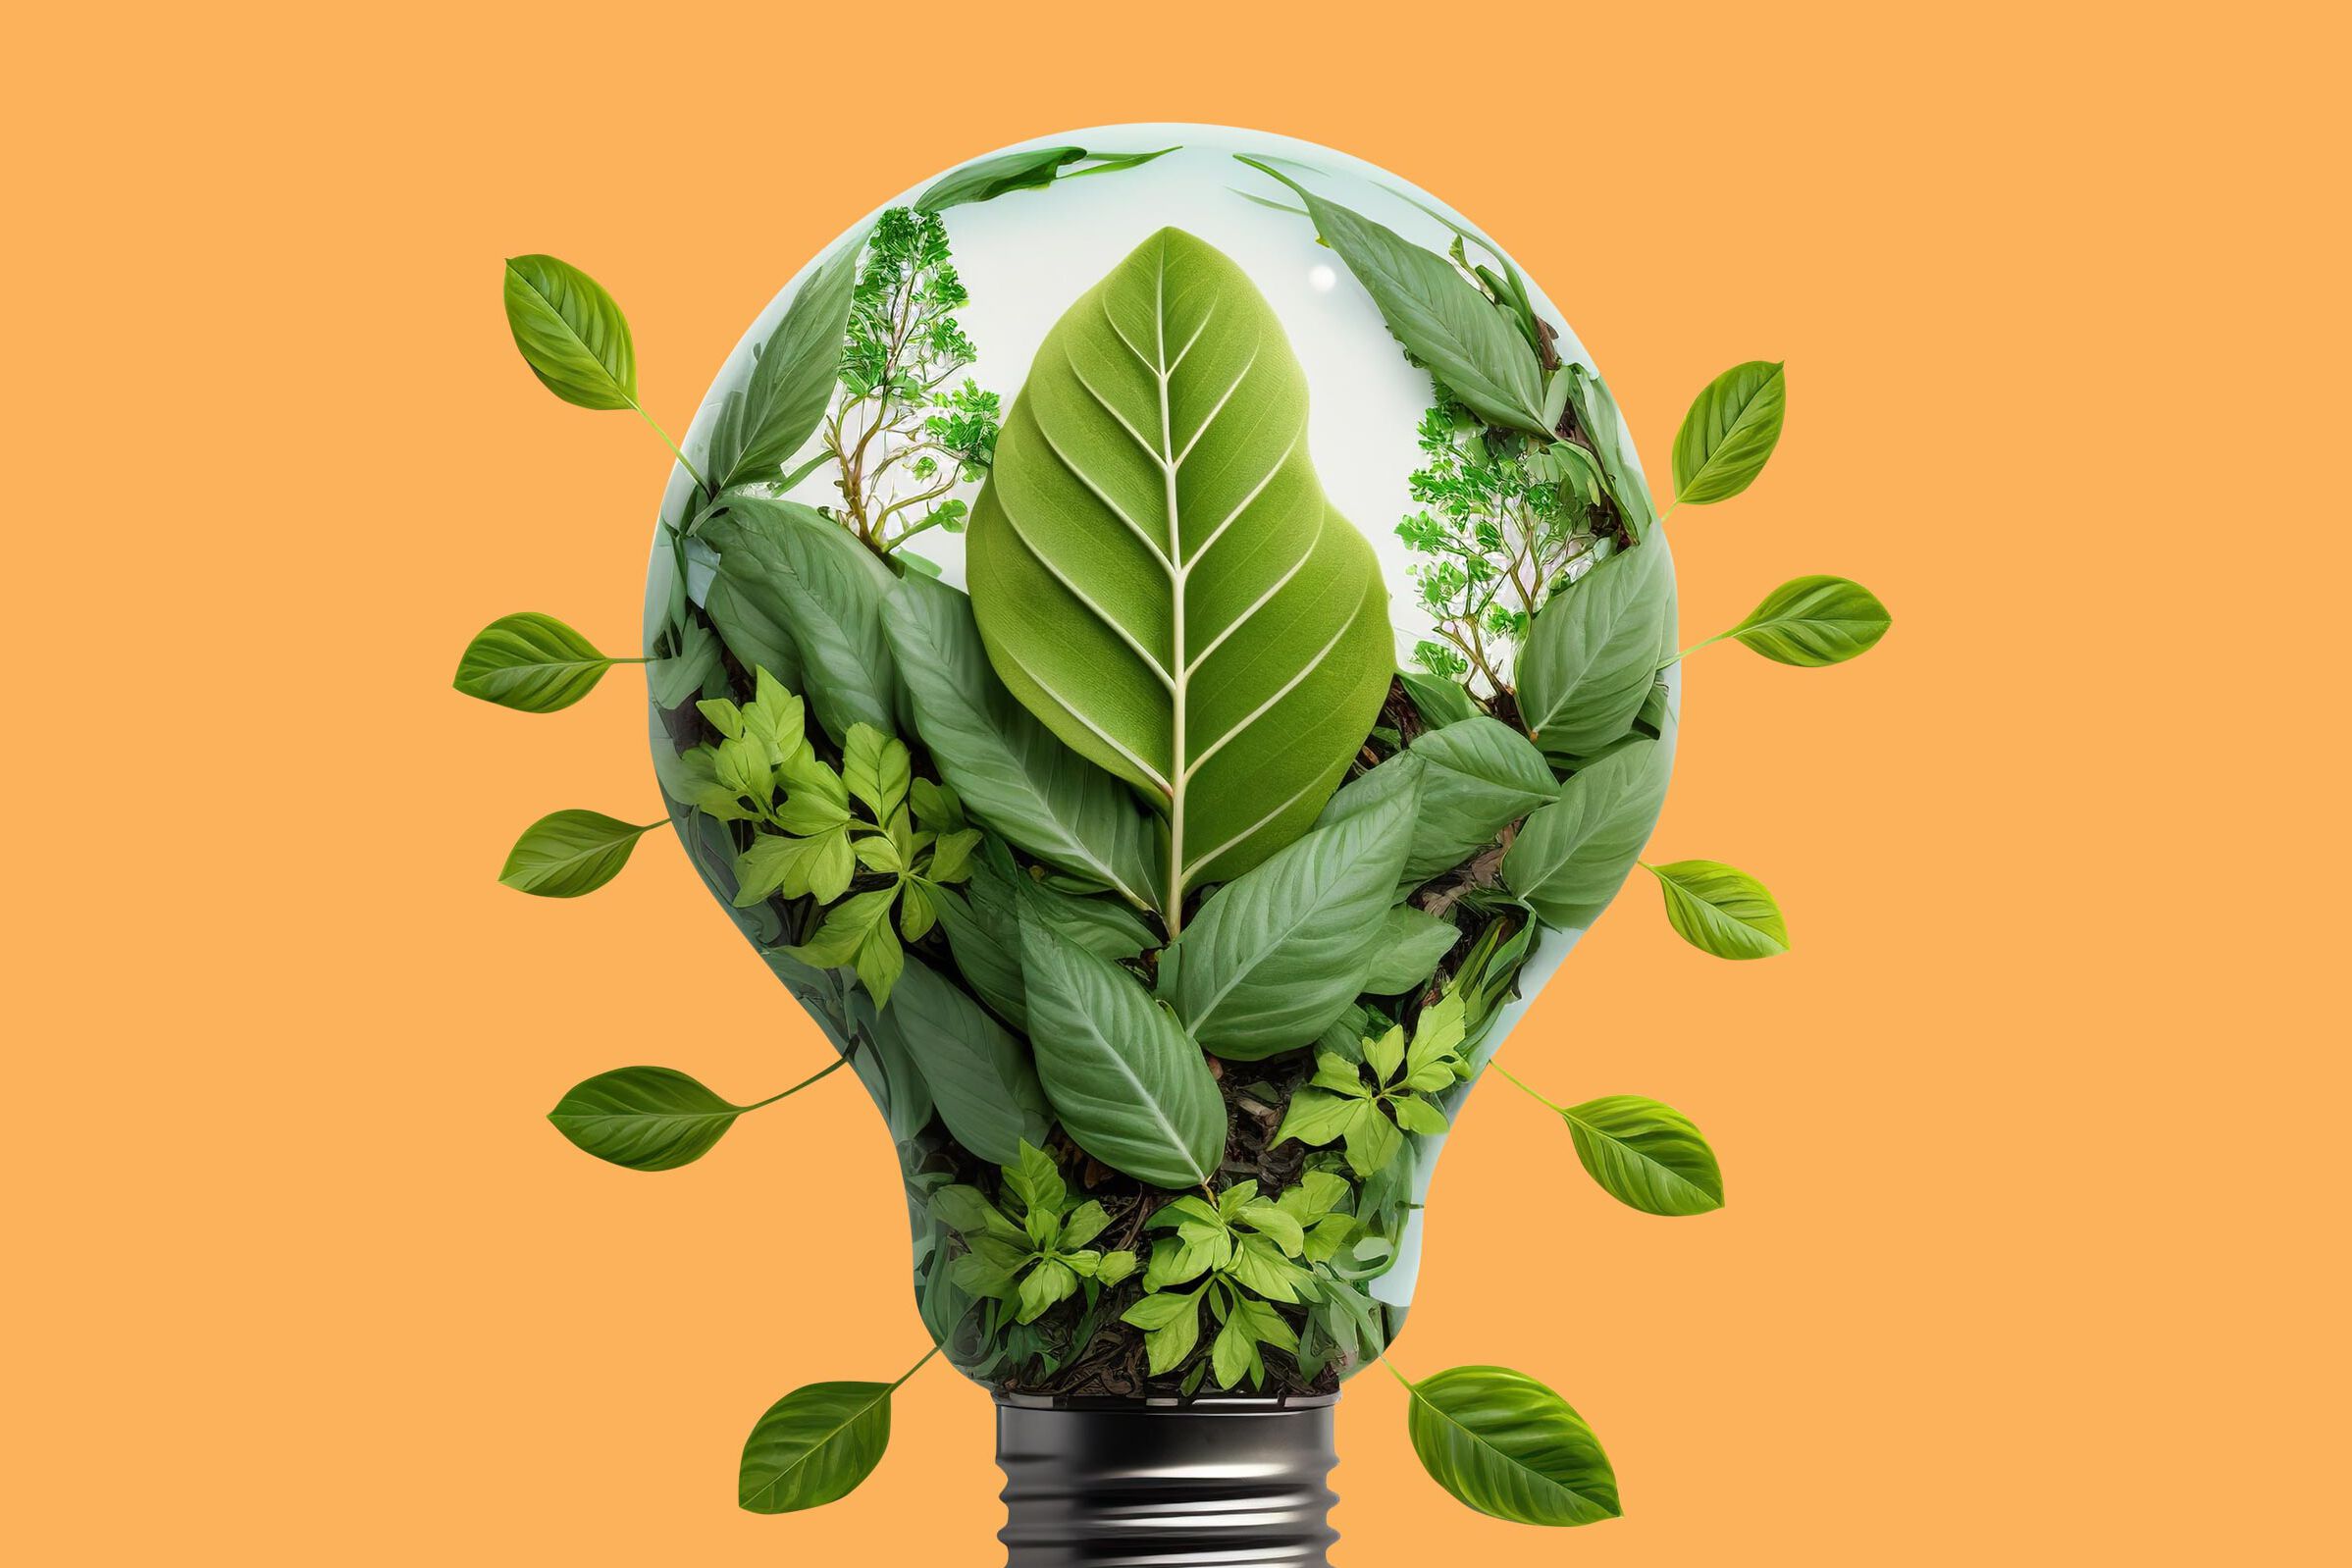 Sustainability and energy efficiency - light bulb with green leaves against an orange background